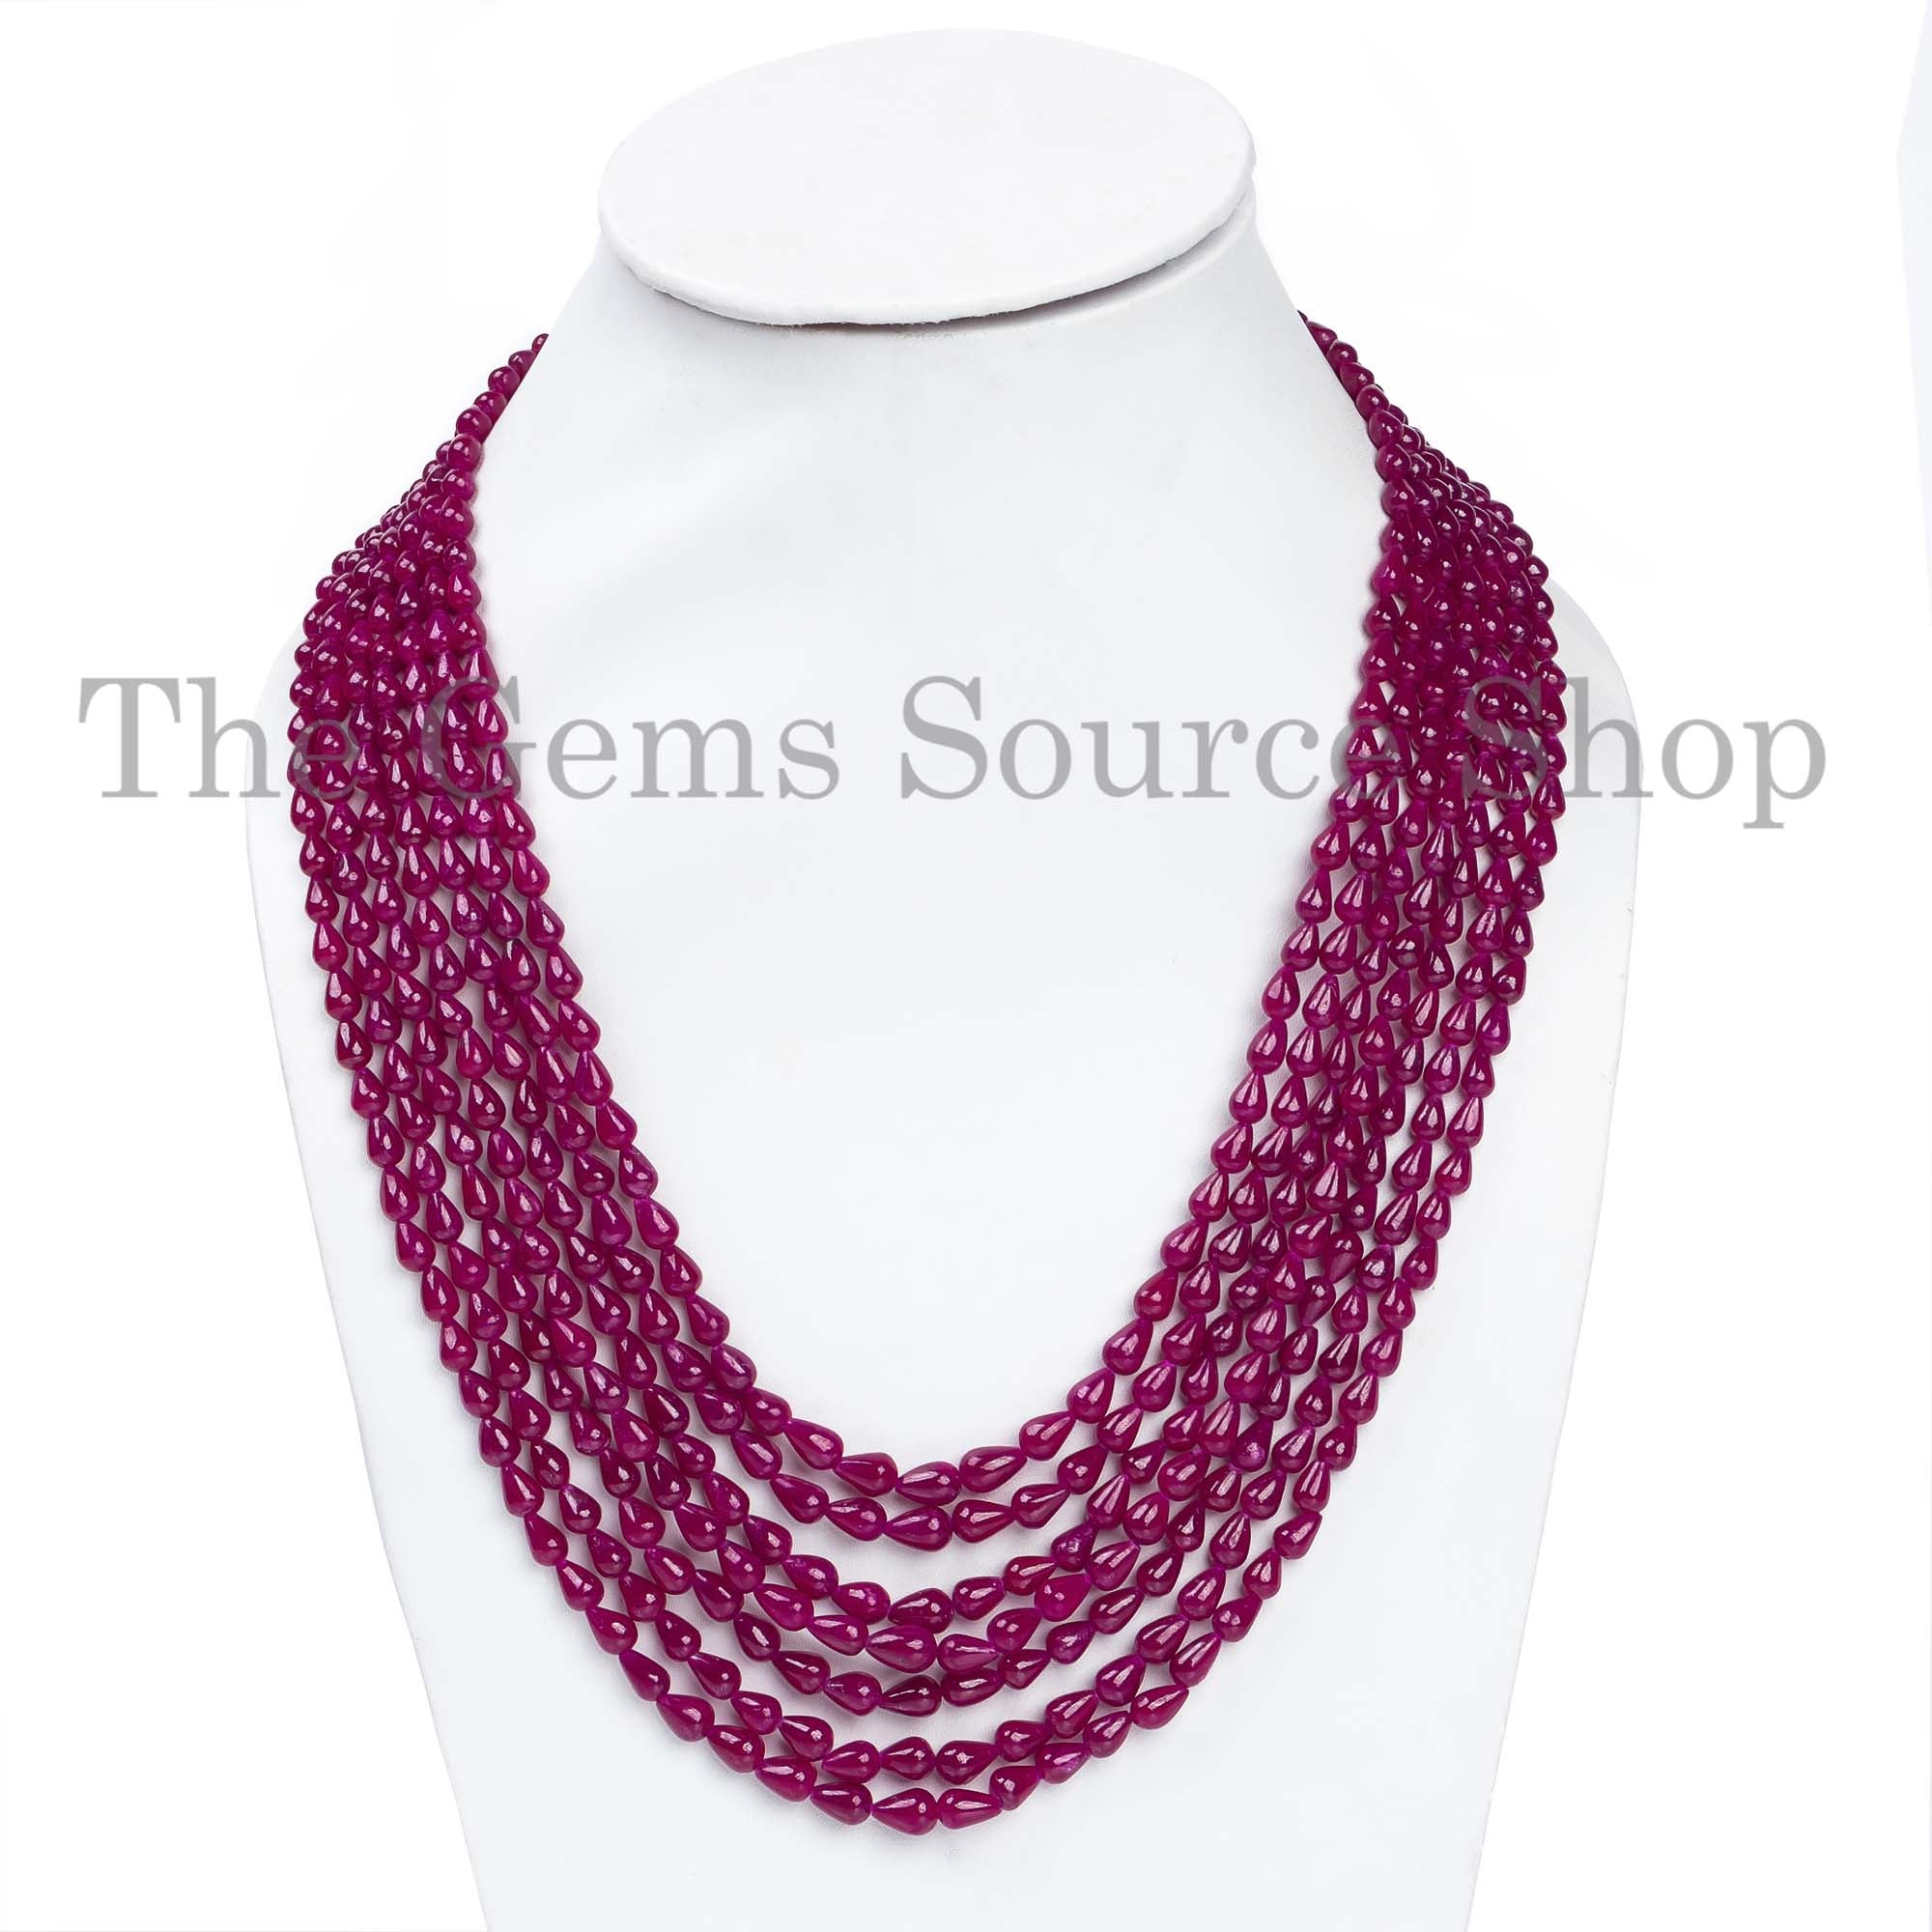 Natural Ruby Smooth Necklace, Gemstone Necklace, 4x5-6.5x9.5mm Tear Drop Beads, Birthstone Necklace, Beaded Necklace